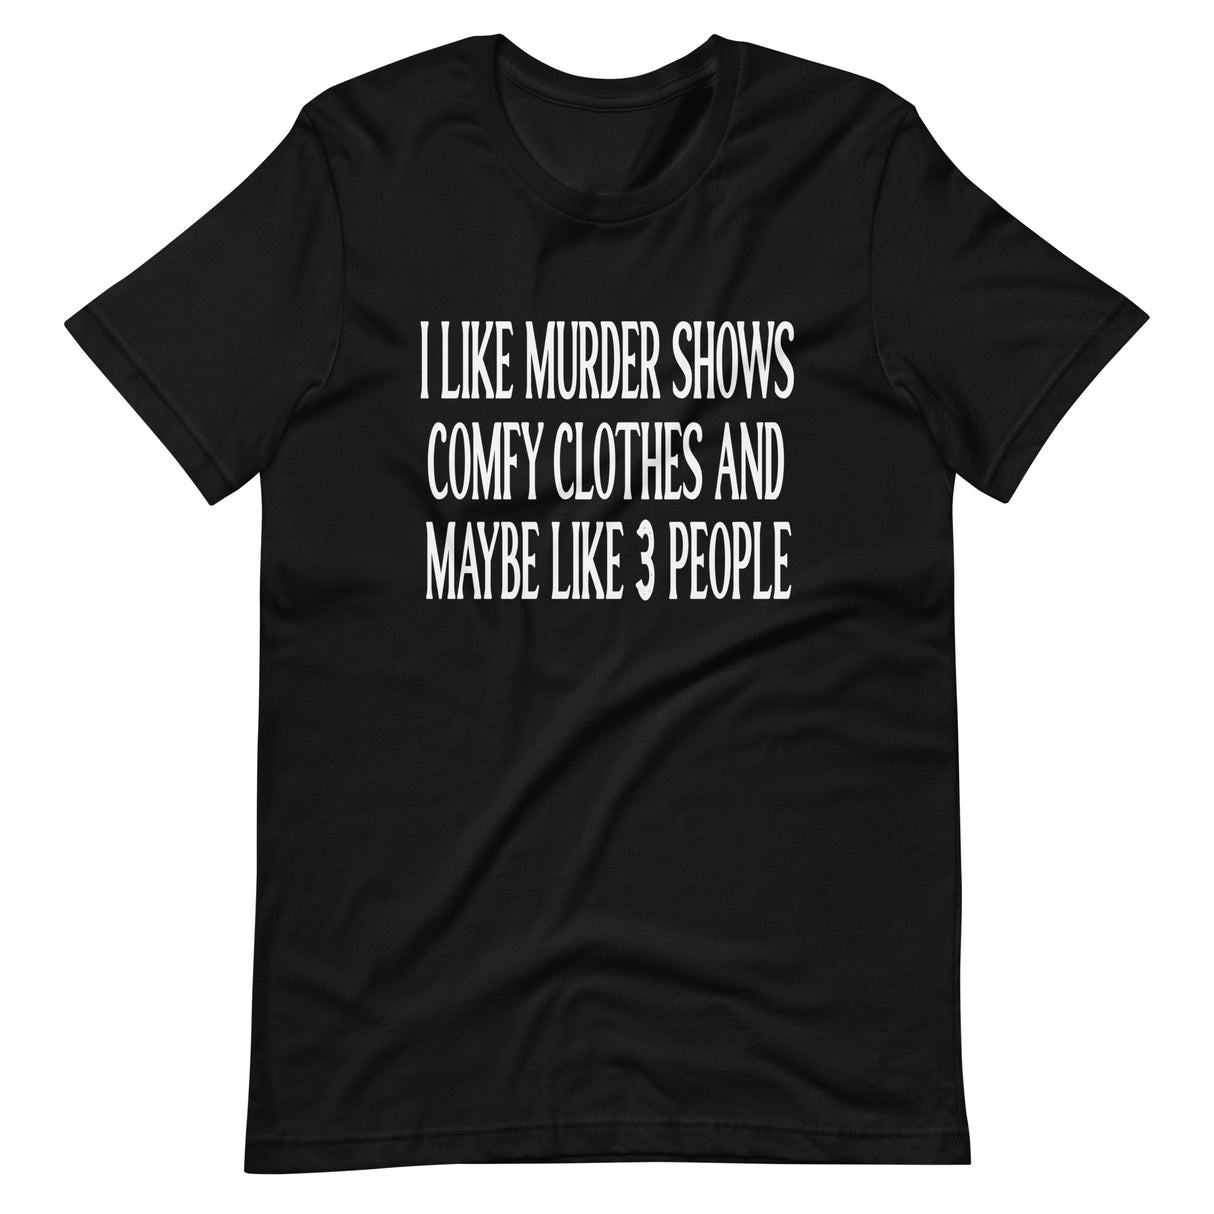 I Like Murder Shows Comfy Clothes and Maybe Like 3 People Shirt